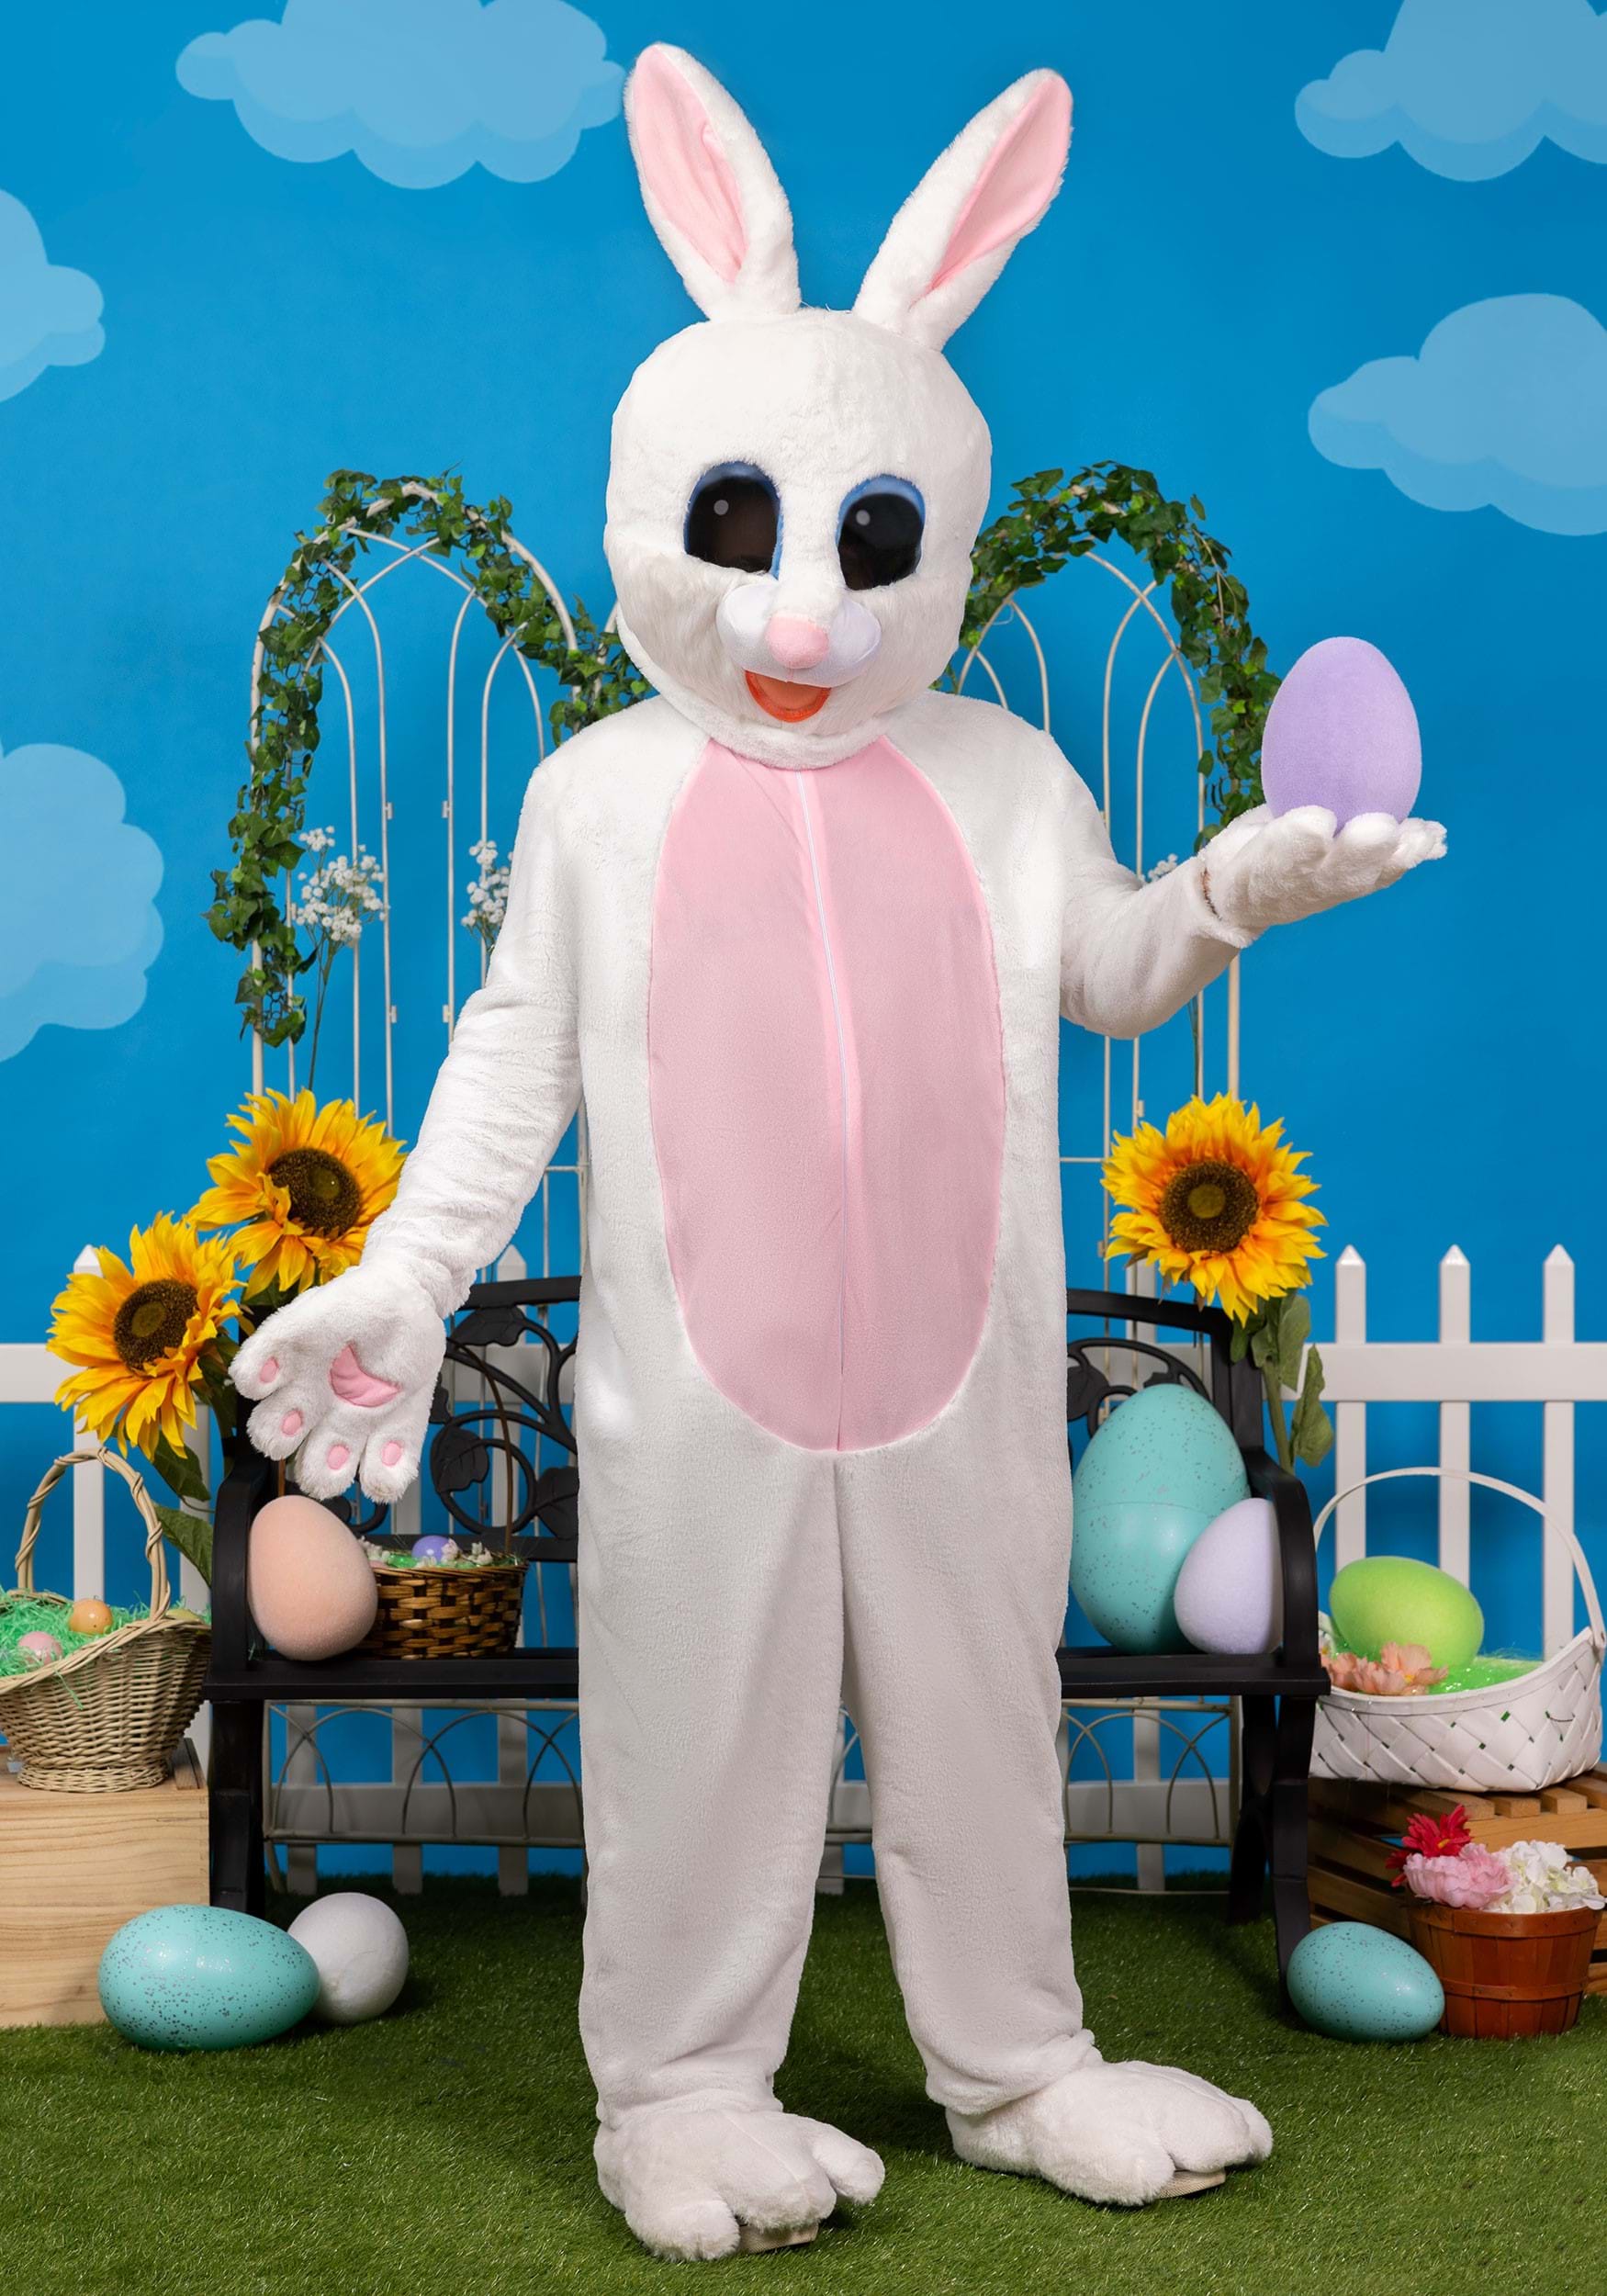 https://images.halloweencostumes.ca/products/53930/1-1/plus-size-mascot-easter-bunny-costume.jpg